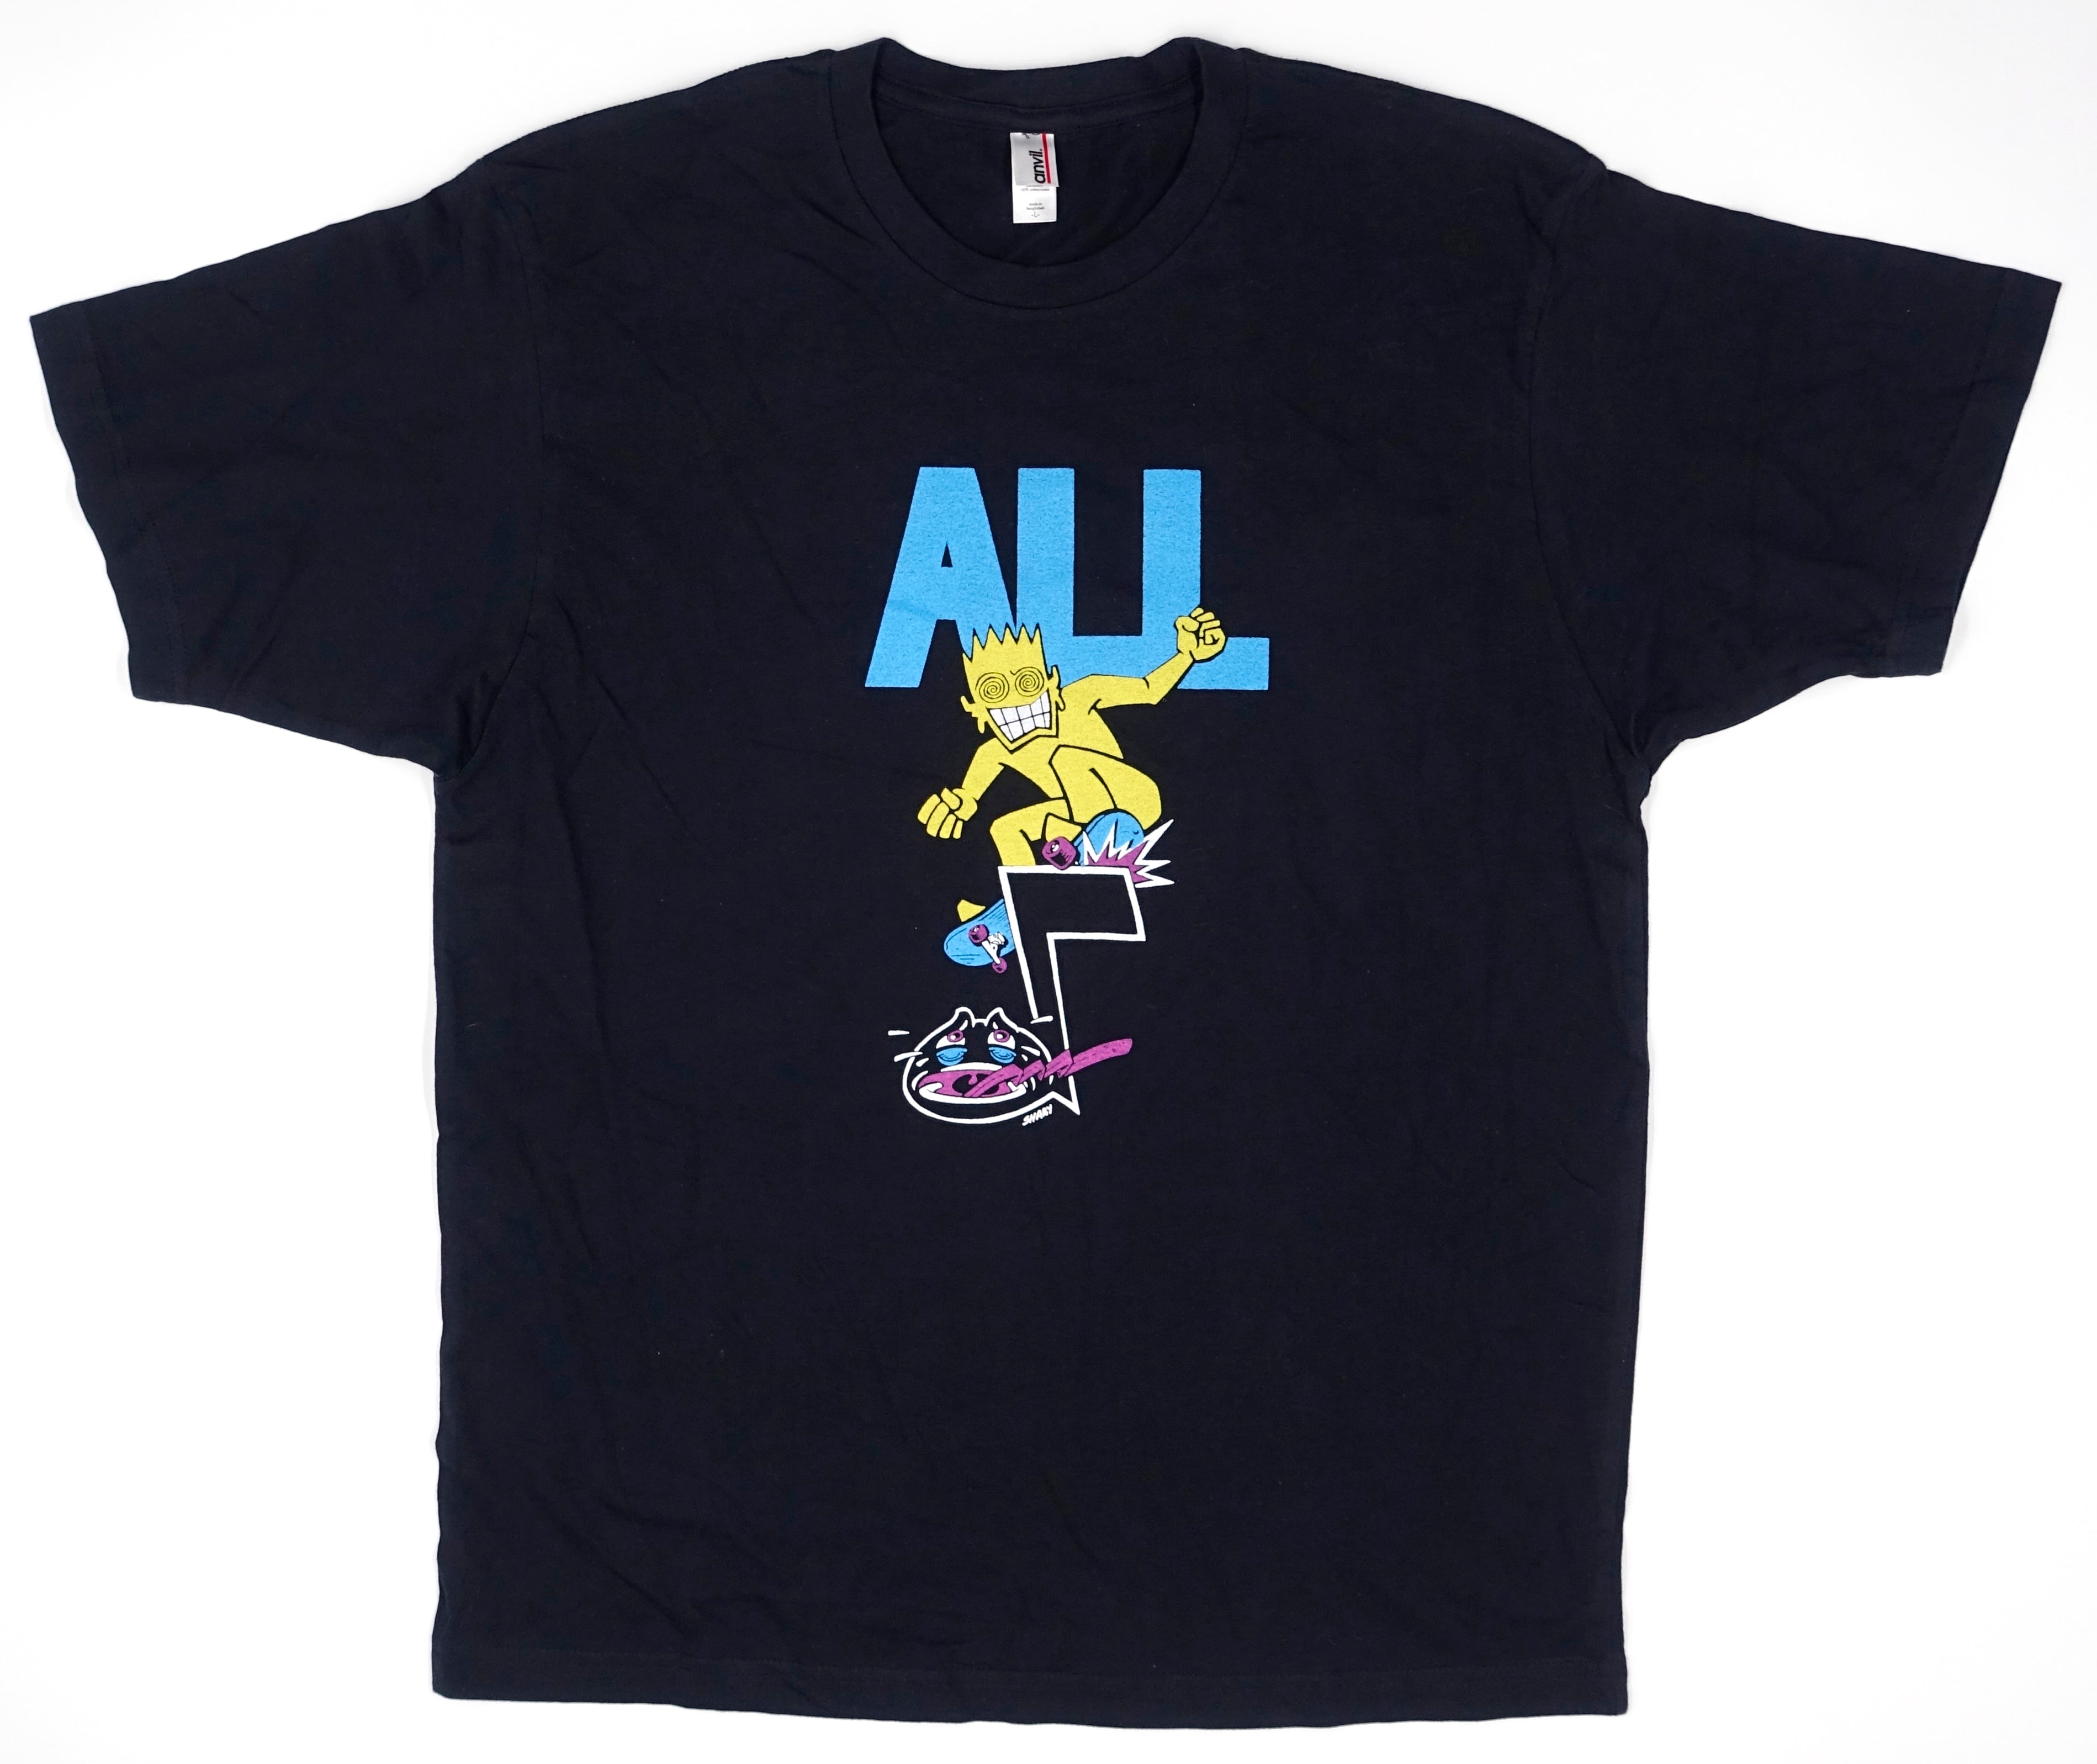 ALL - Smith Grind Allroy Southern CA 2009 Tour Shirt Size Large